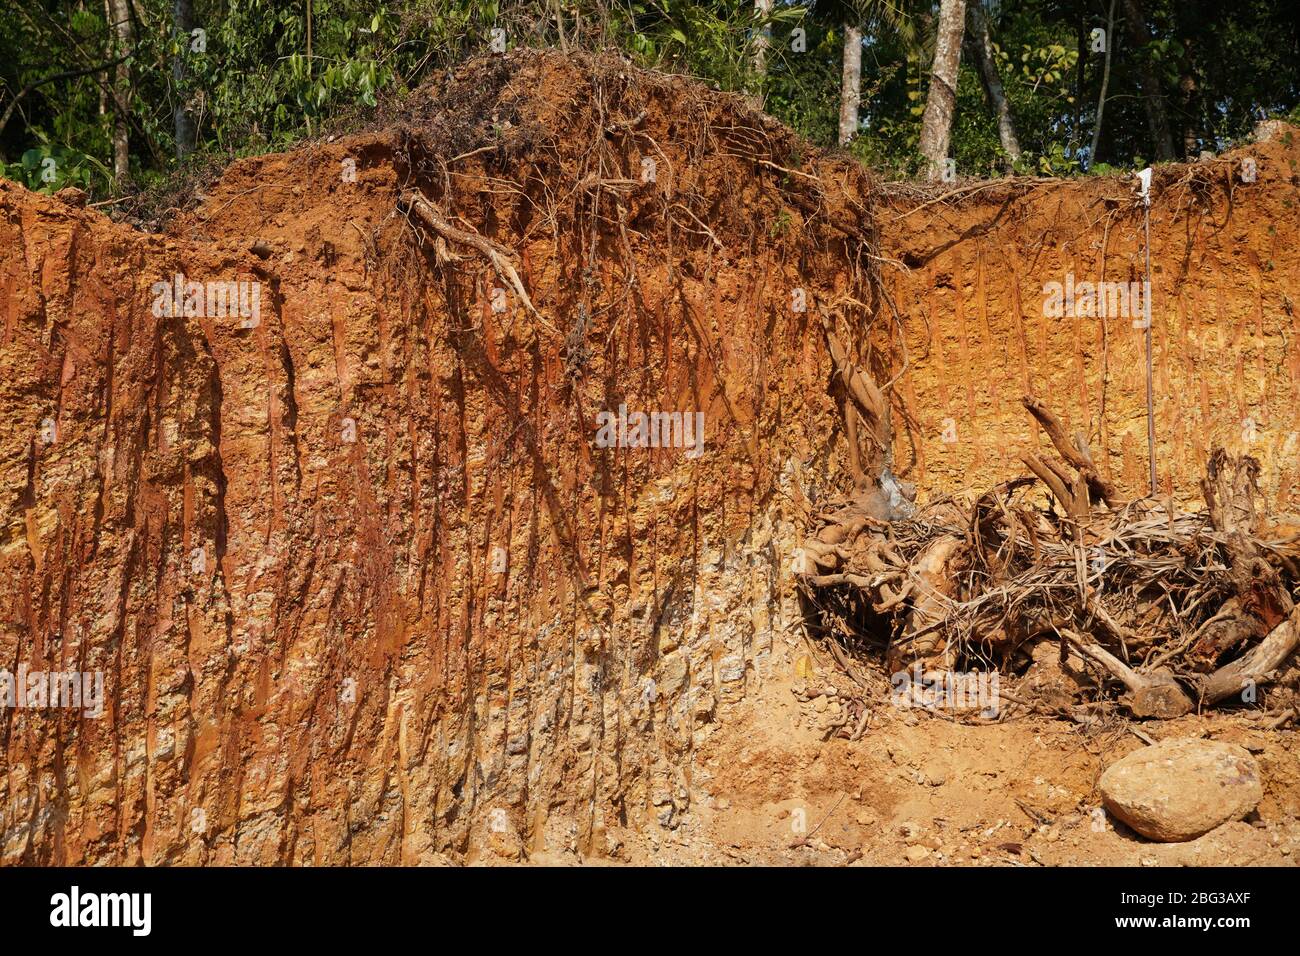 Deforestation close up with roots, rocks showing in sunlight. Red and yellow rocks where soil was dug from forest using an excavator in construction s Stock Photo